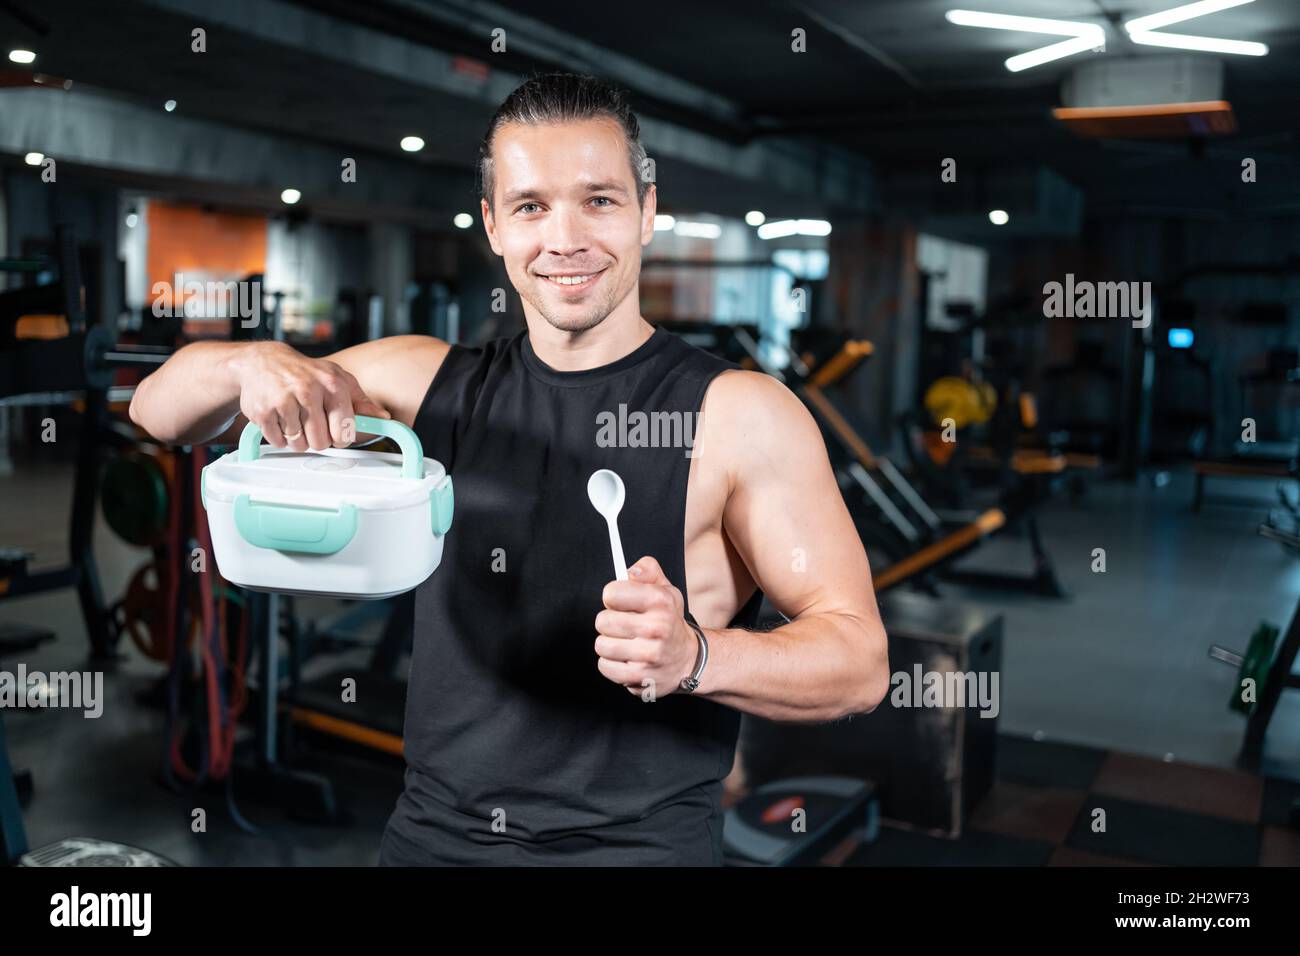 young attractive man personal trainer holding lunch box with breakfast in gym Stock Photo